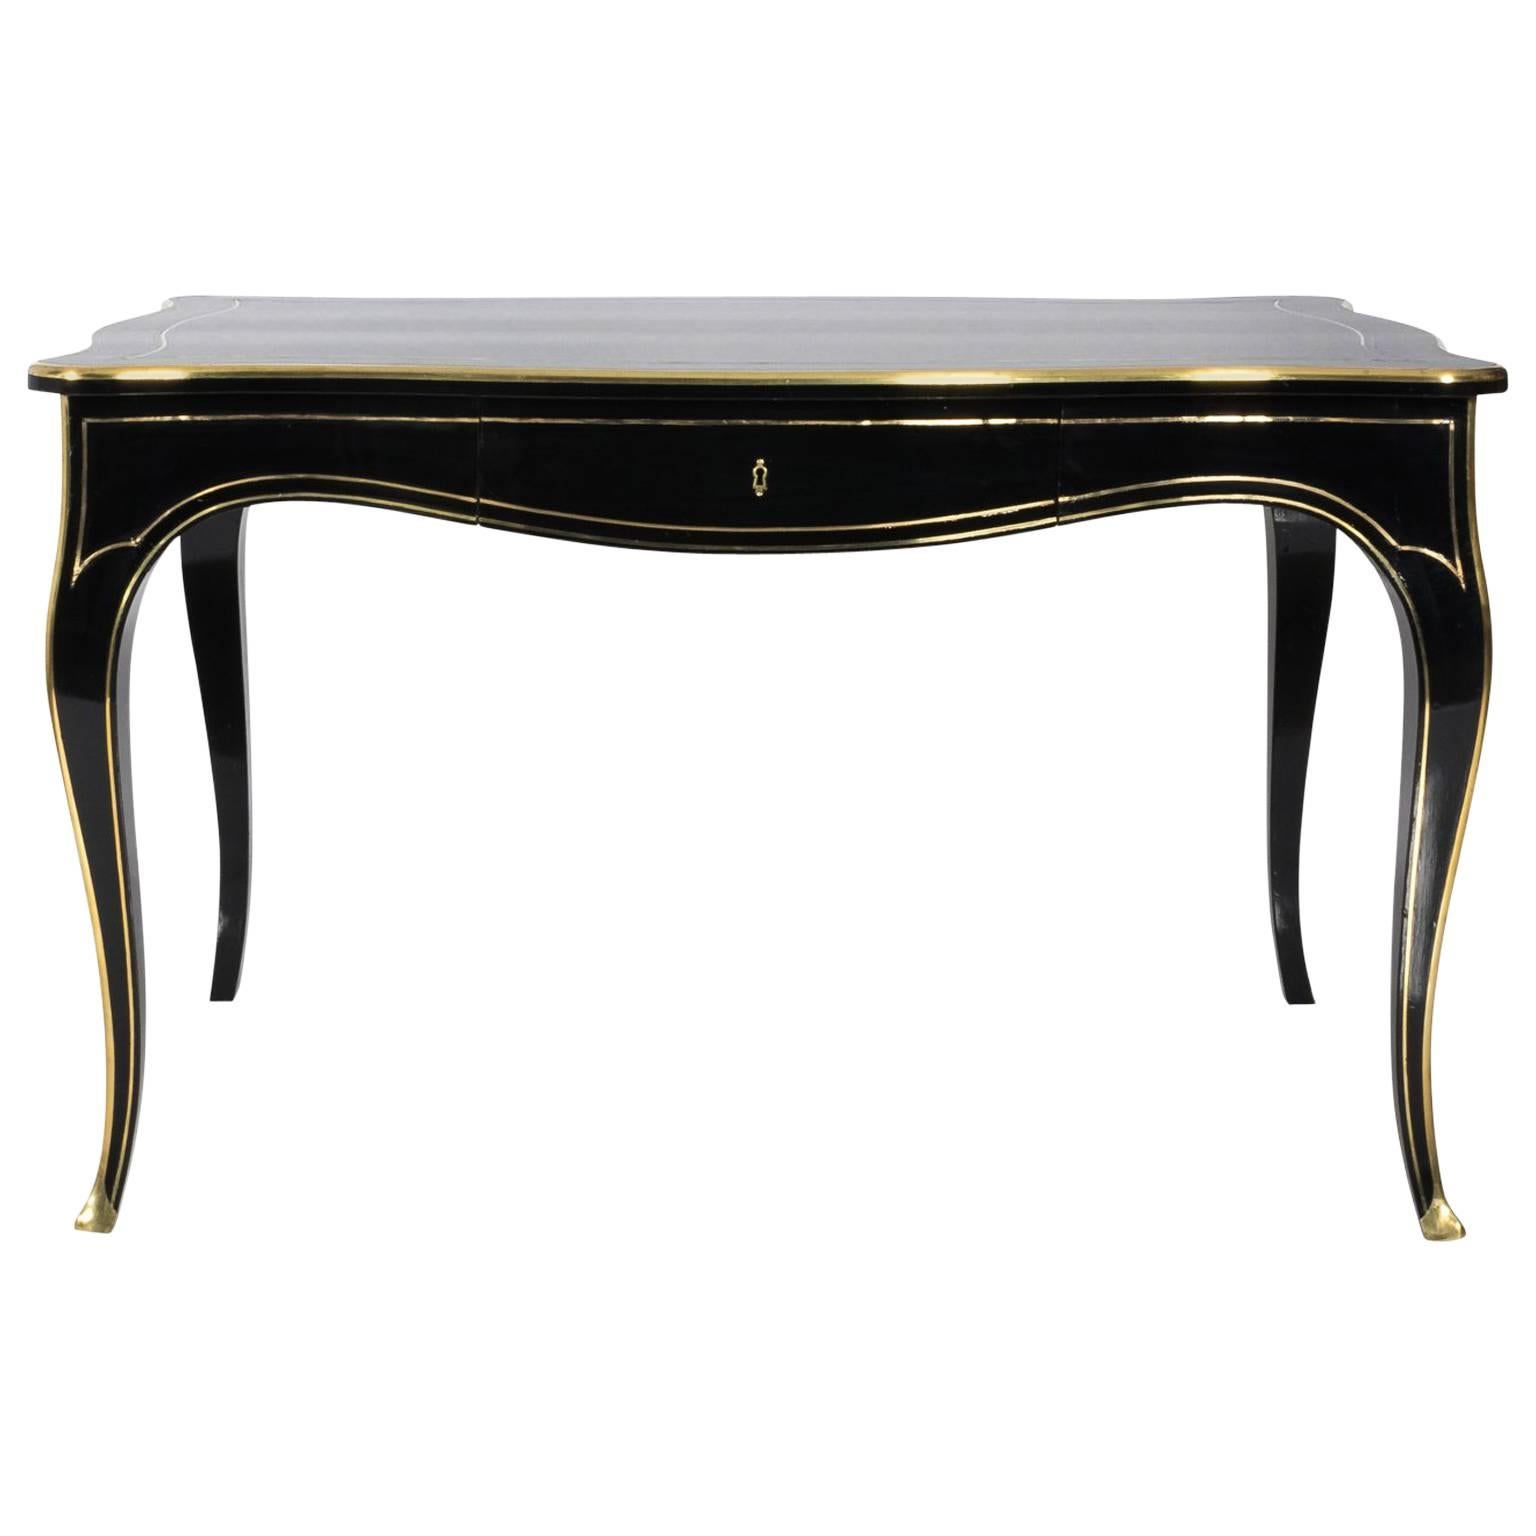 1880s French Black Lacquered Writing Desk